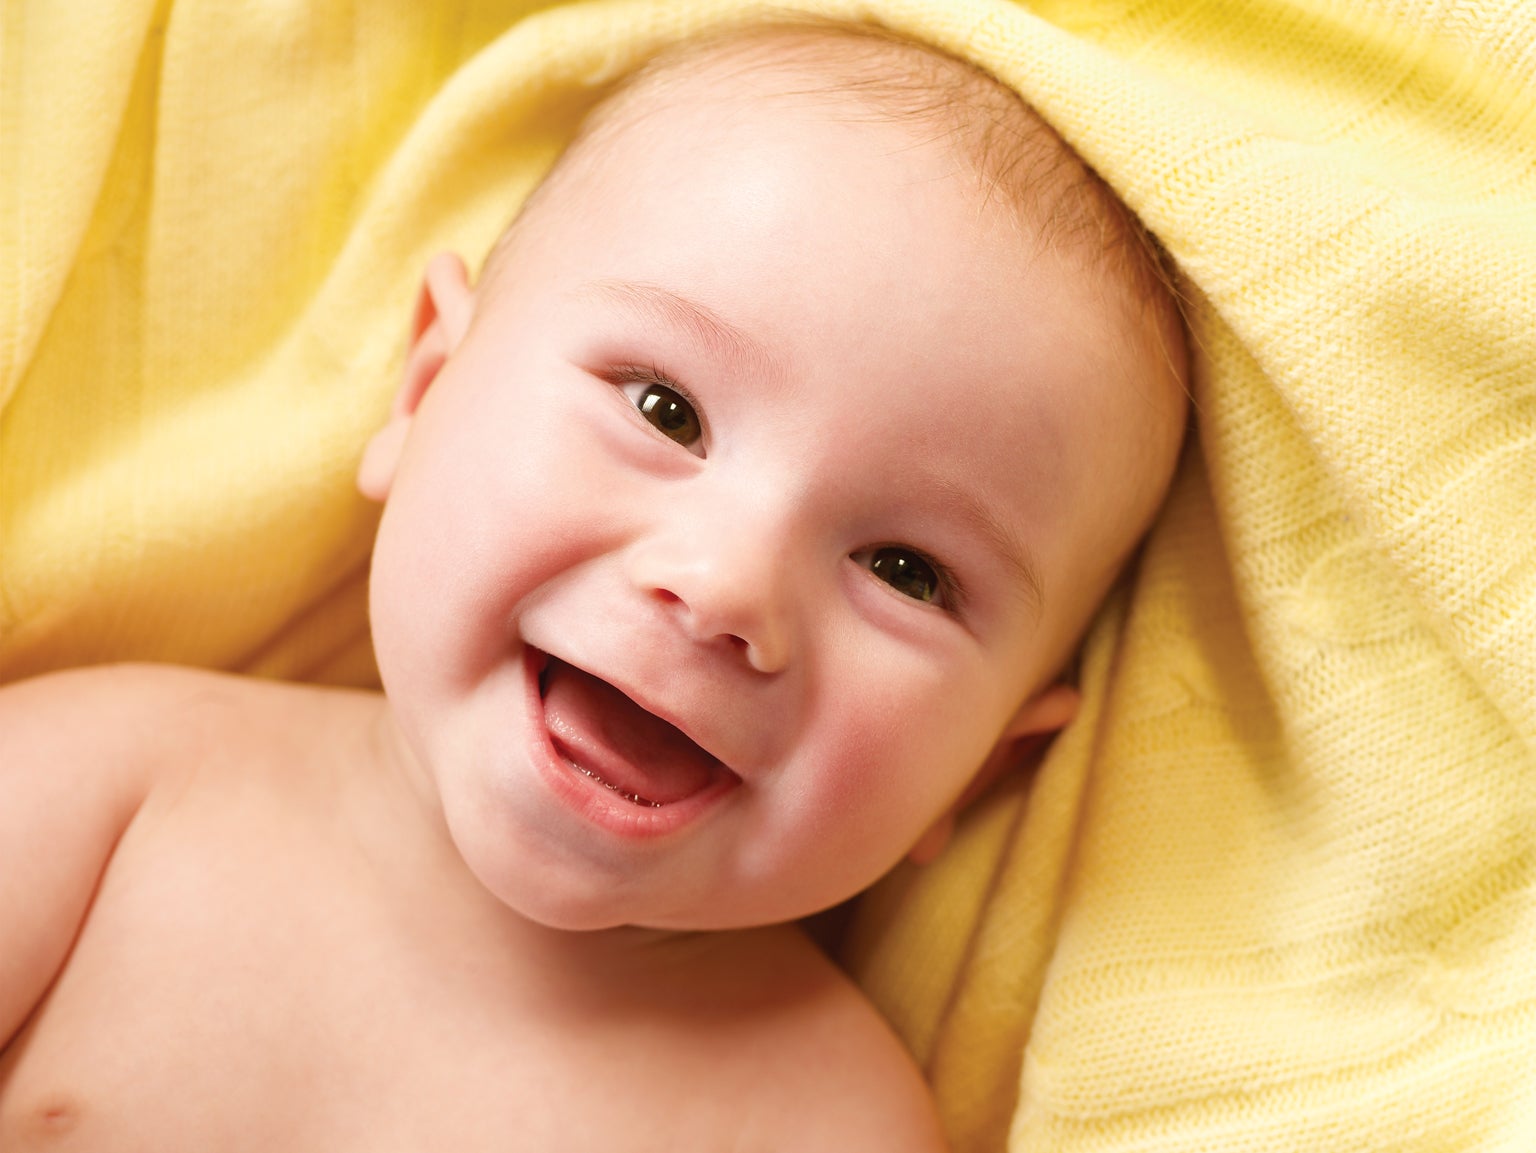 Laughing Matters--and Helps to Explain How Babies Bond - Scientific American